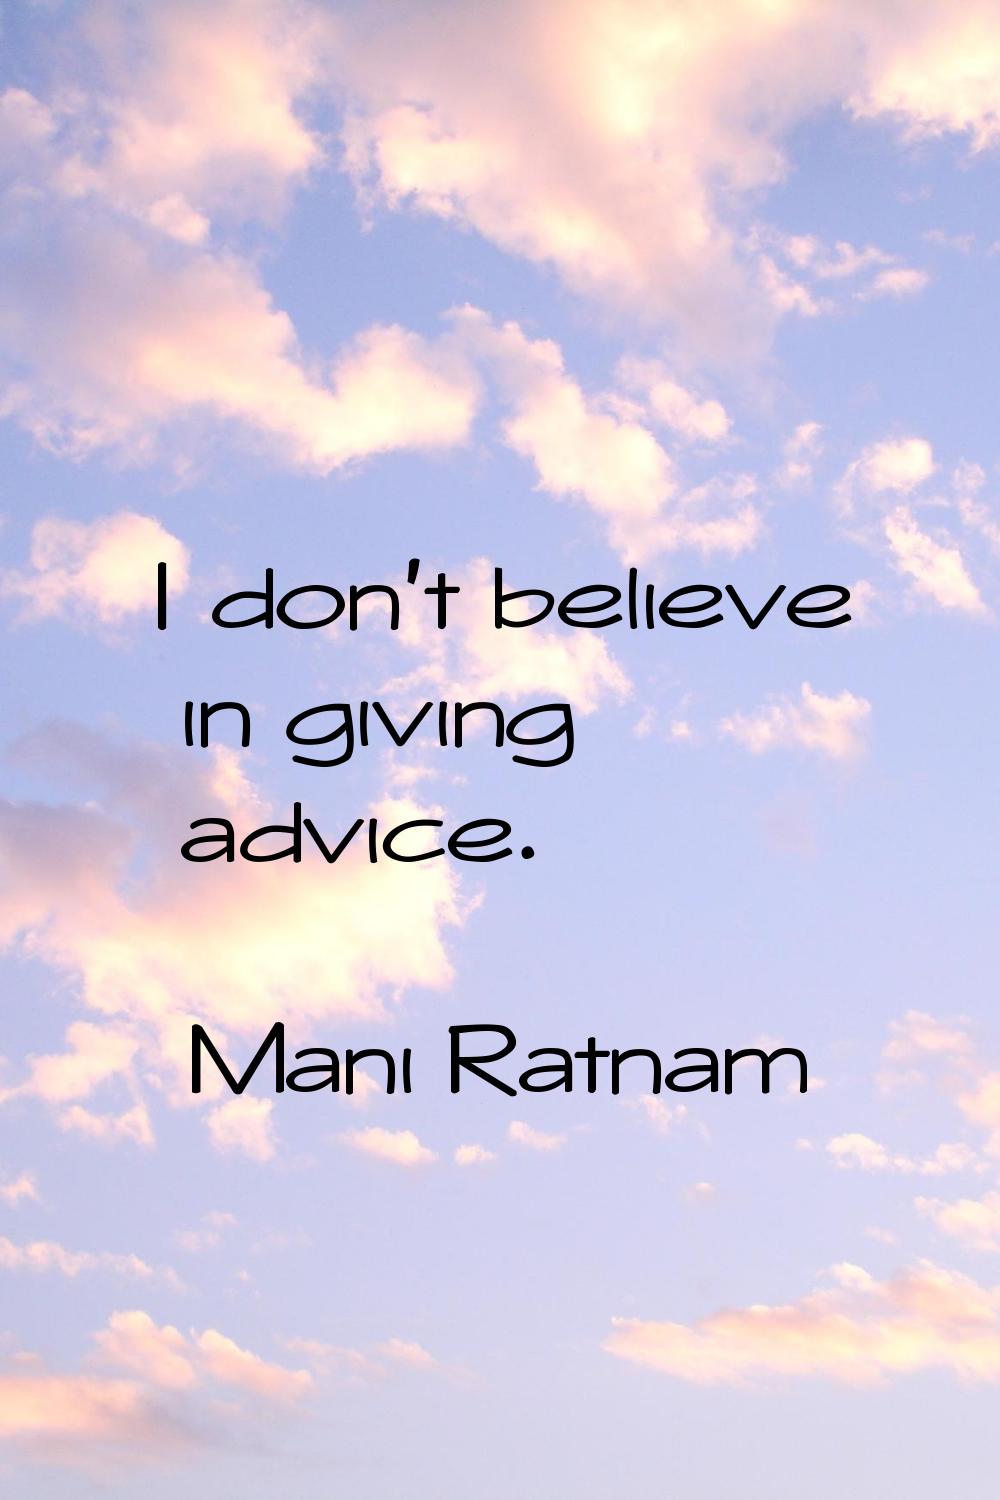 I don't believe in giving advice.